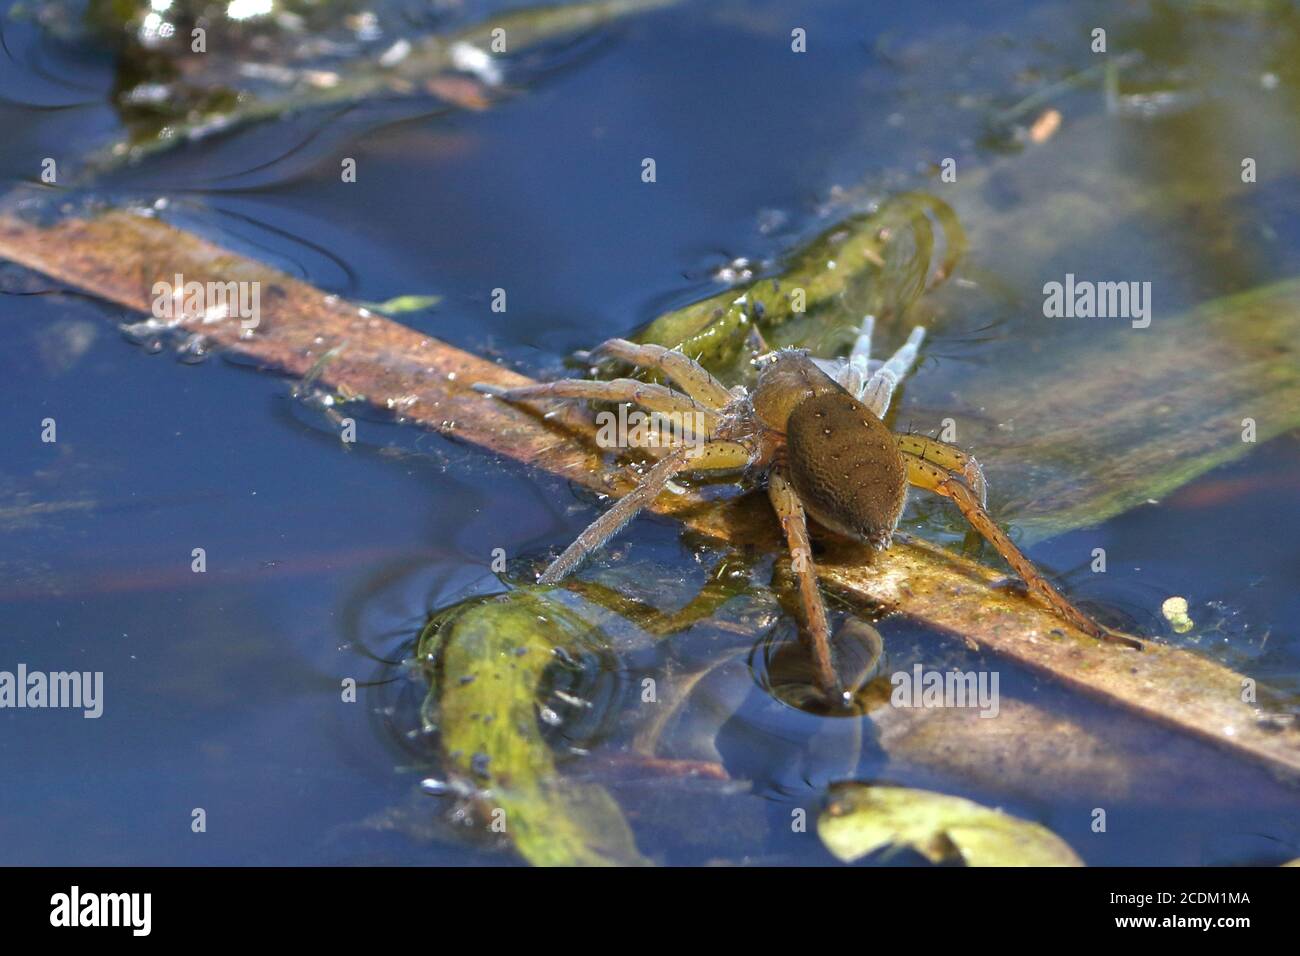 fen raft spider, great raft spider (Dolomedes plantarius, Dolomedes riparius), sits on a leaf on water surface, Netherlands, Overijssel, Stock Photo